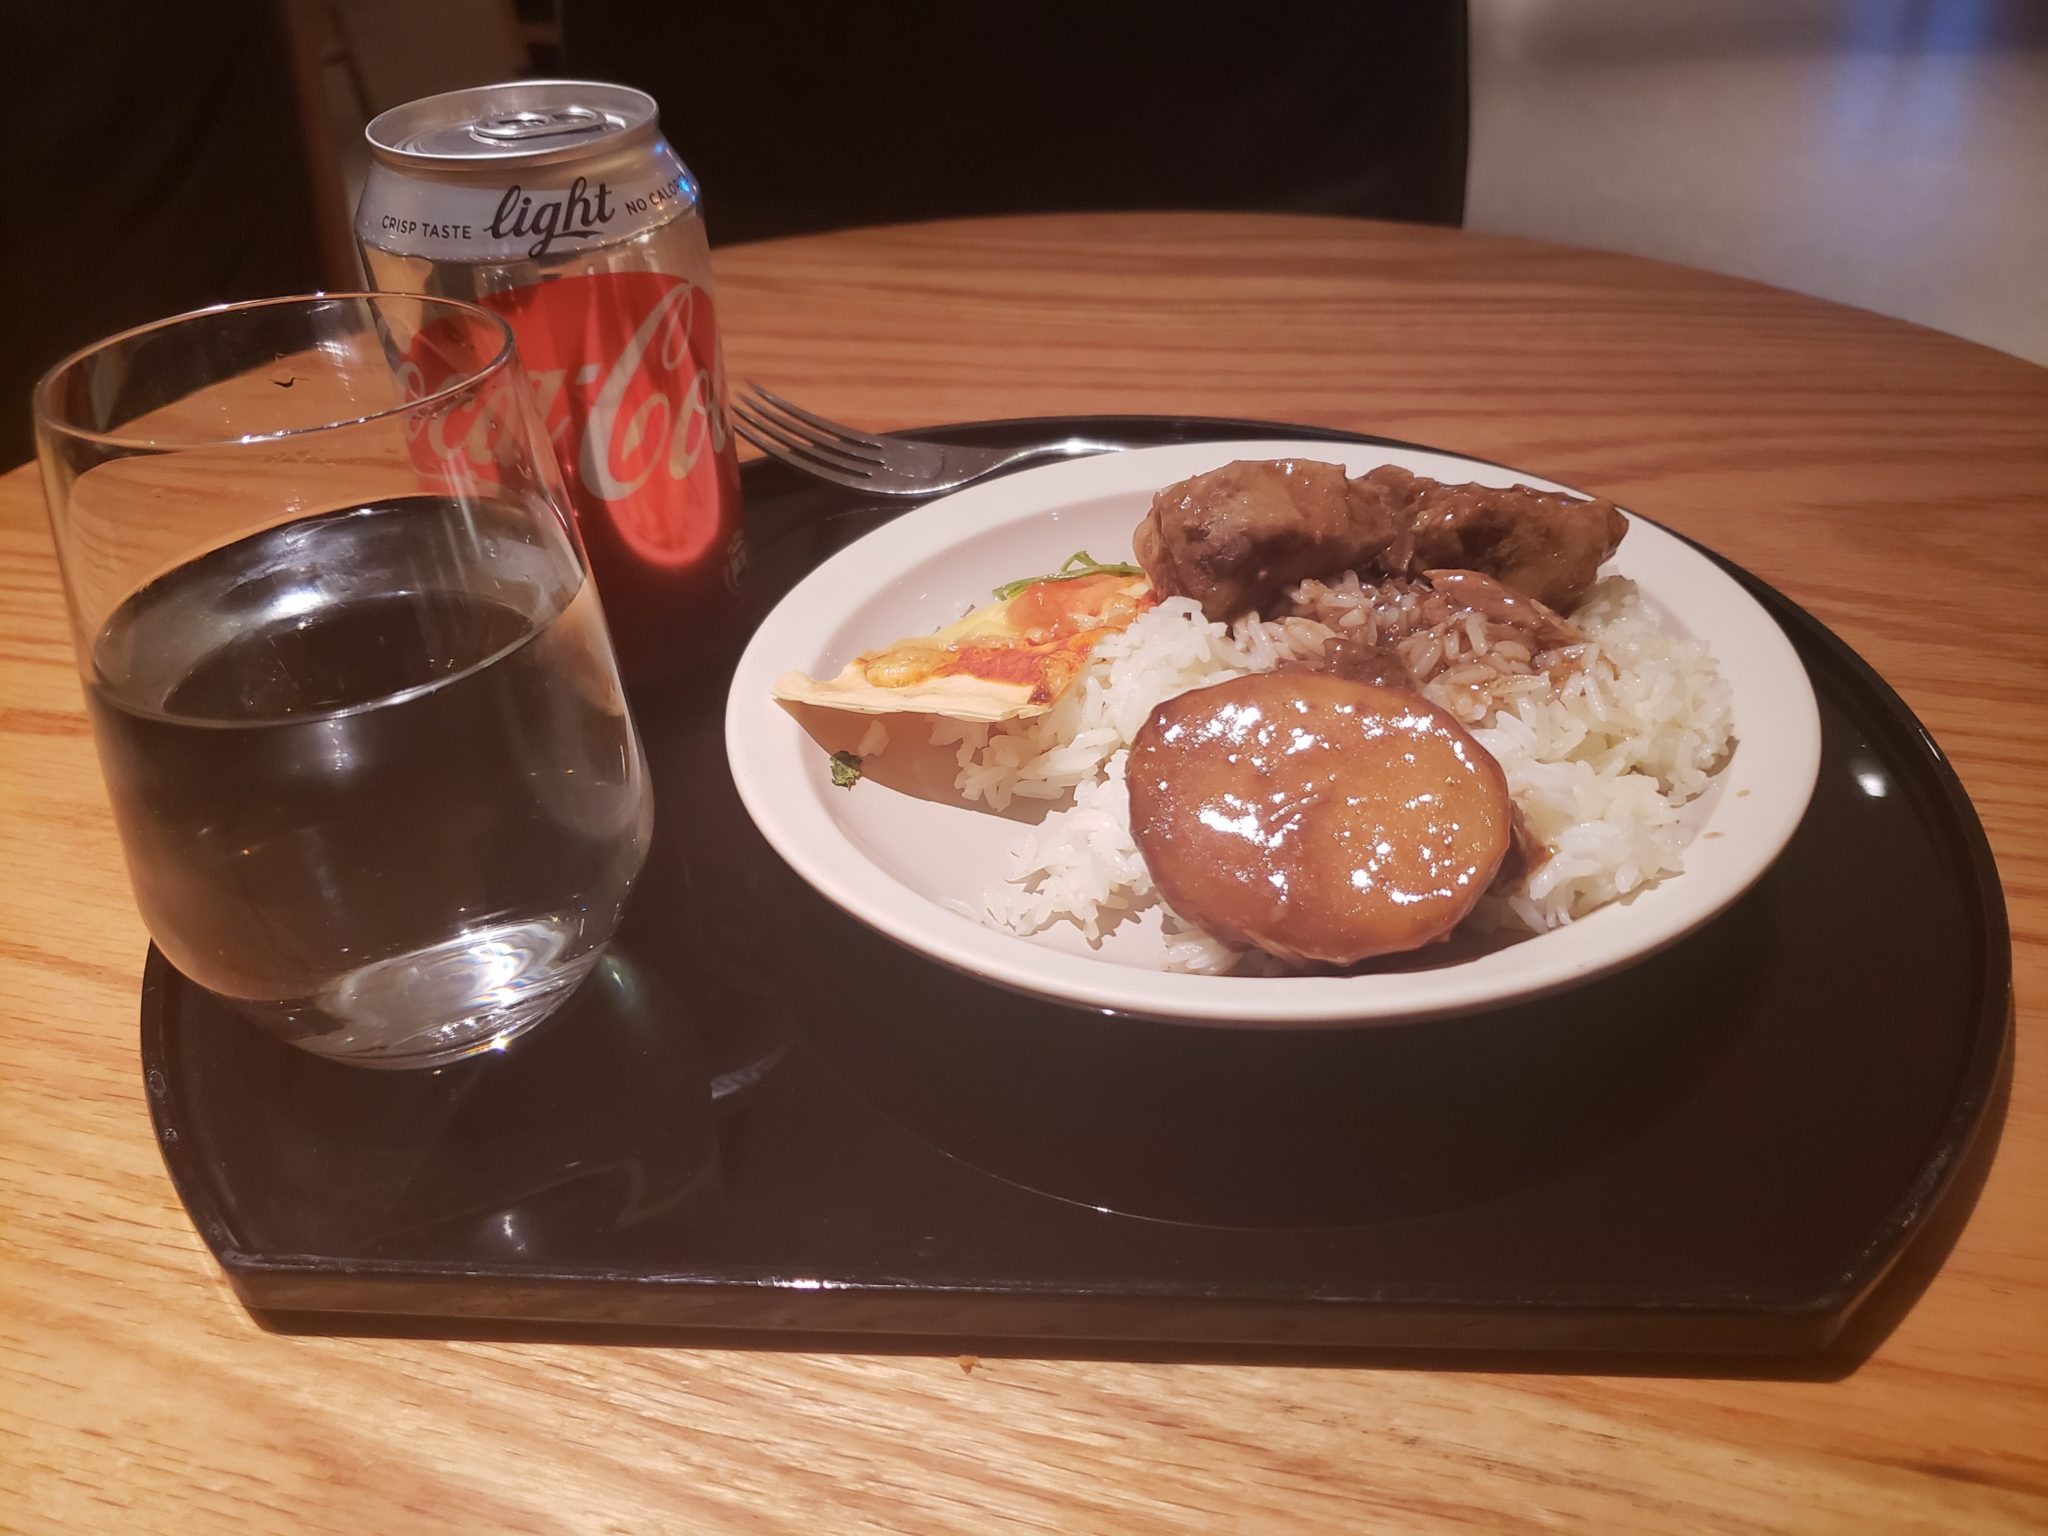 a plate of food and a drink on a tray